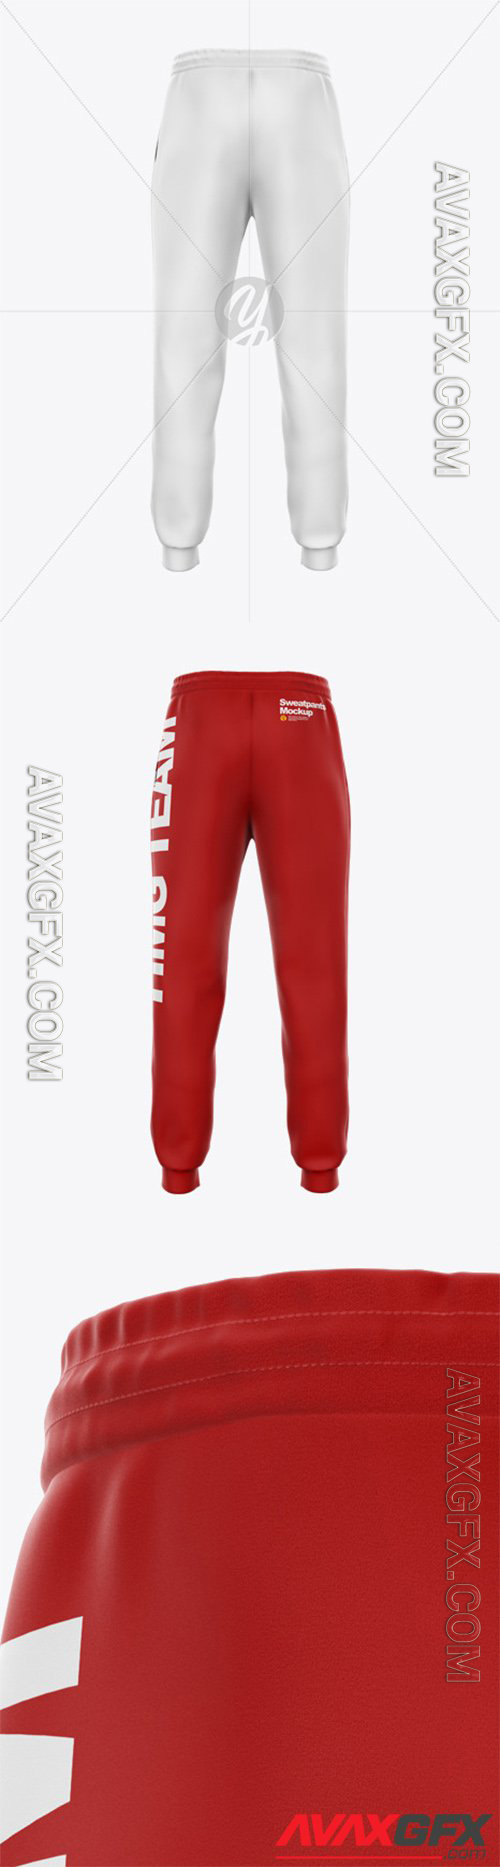 Sweatpants with Cord Mockup - Back View 56707